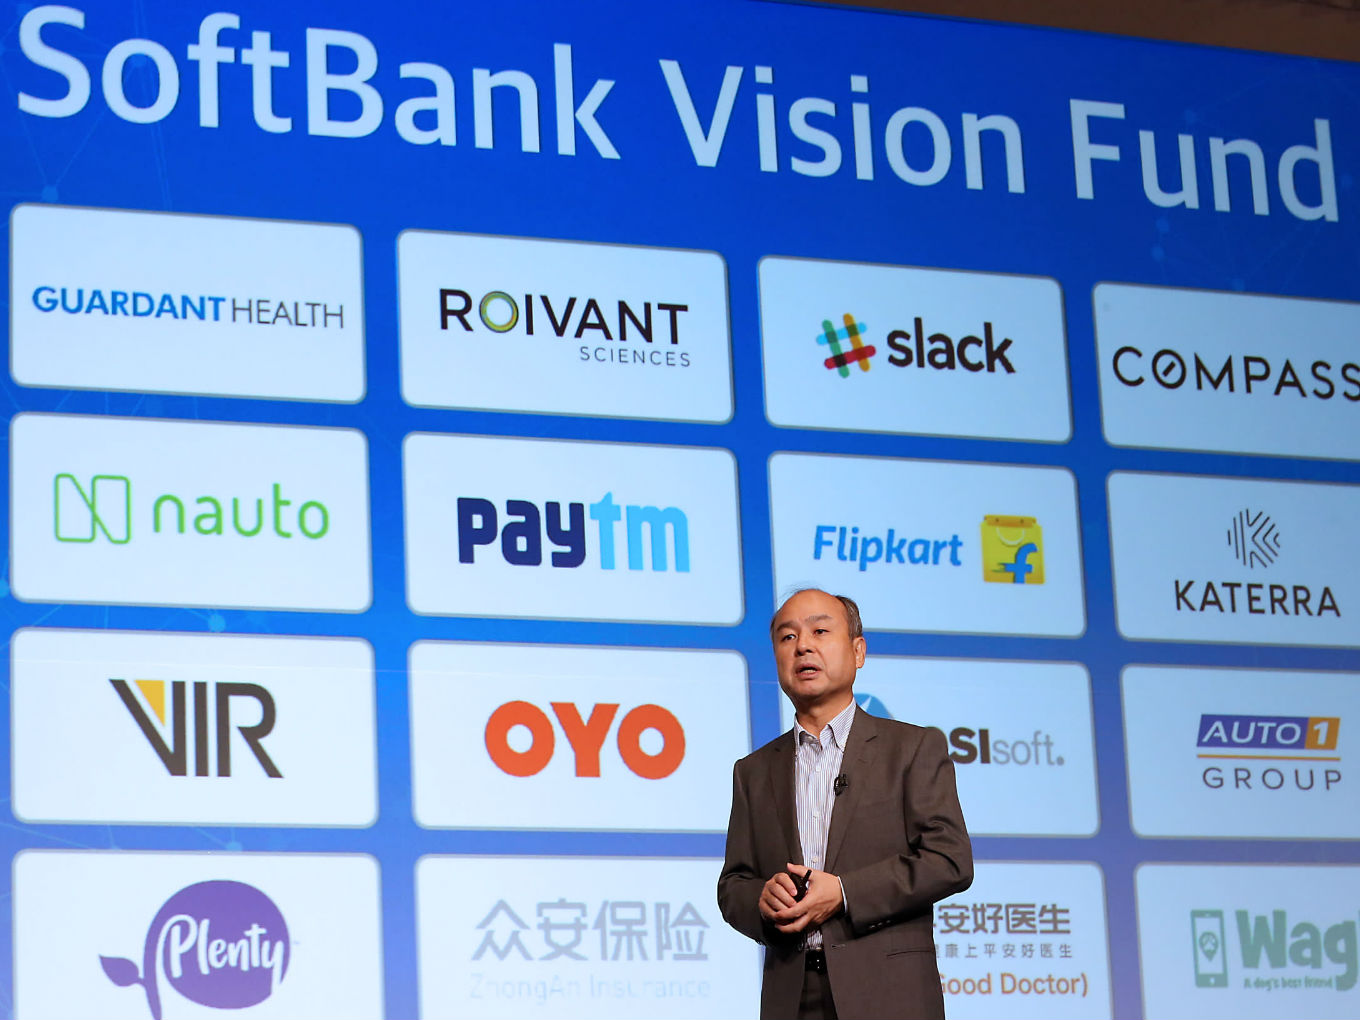 Softbank-vision-fund-feature